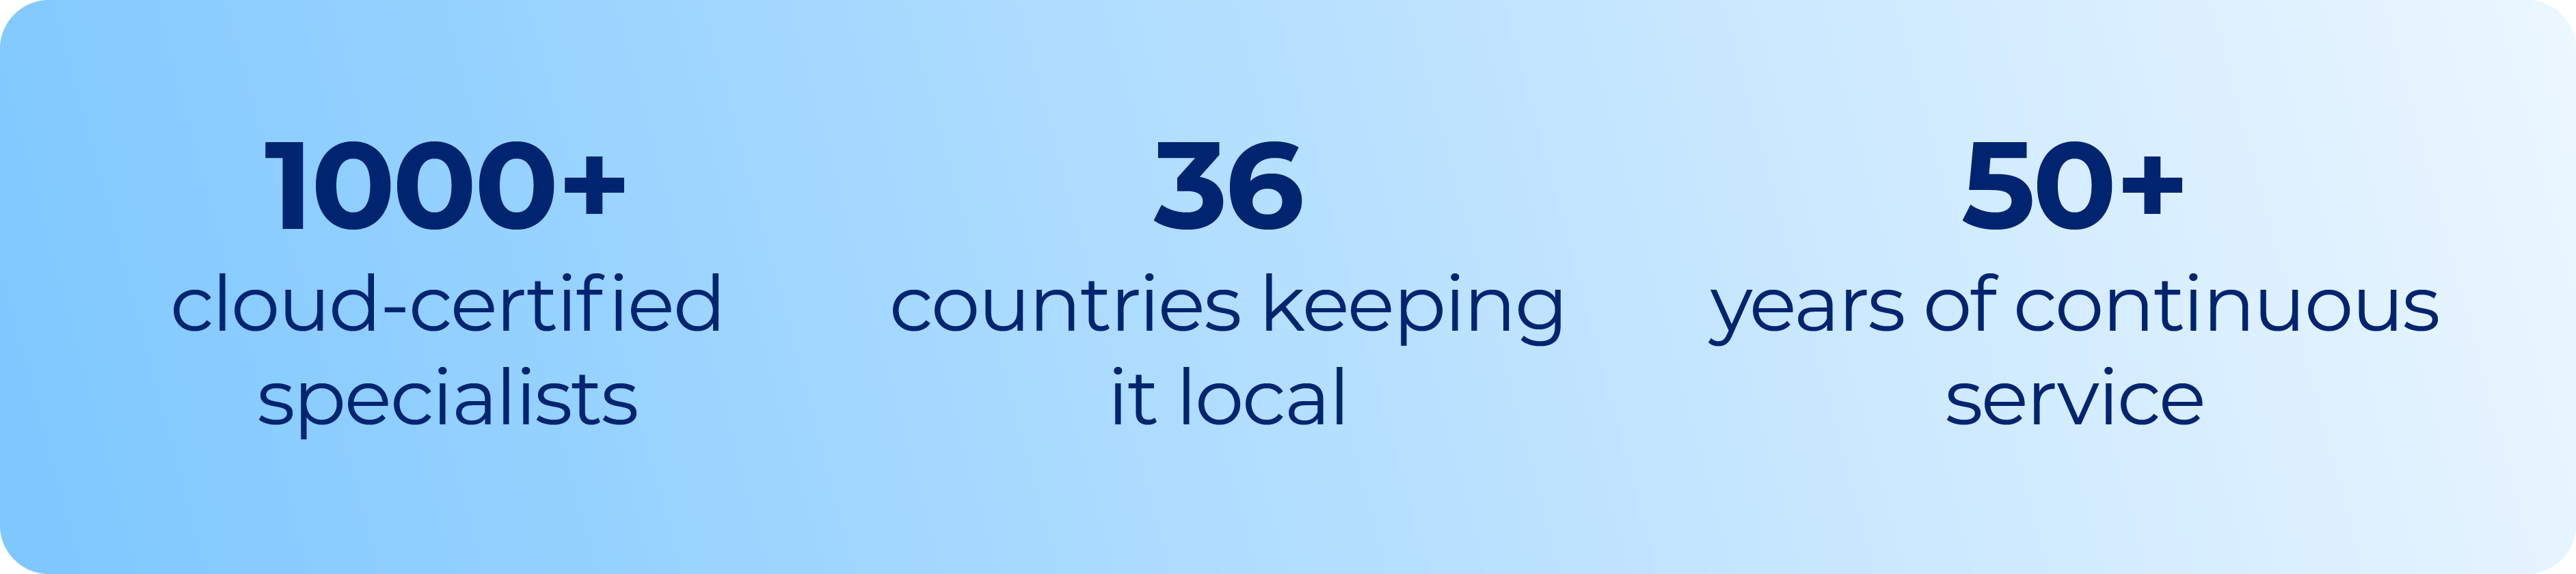 1000+ cloud certified specialists, 36 countries keeping it local, 50+ years of continuous service